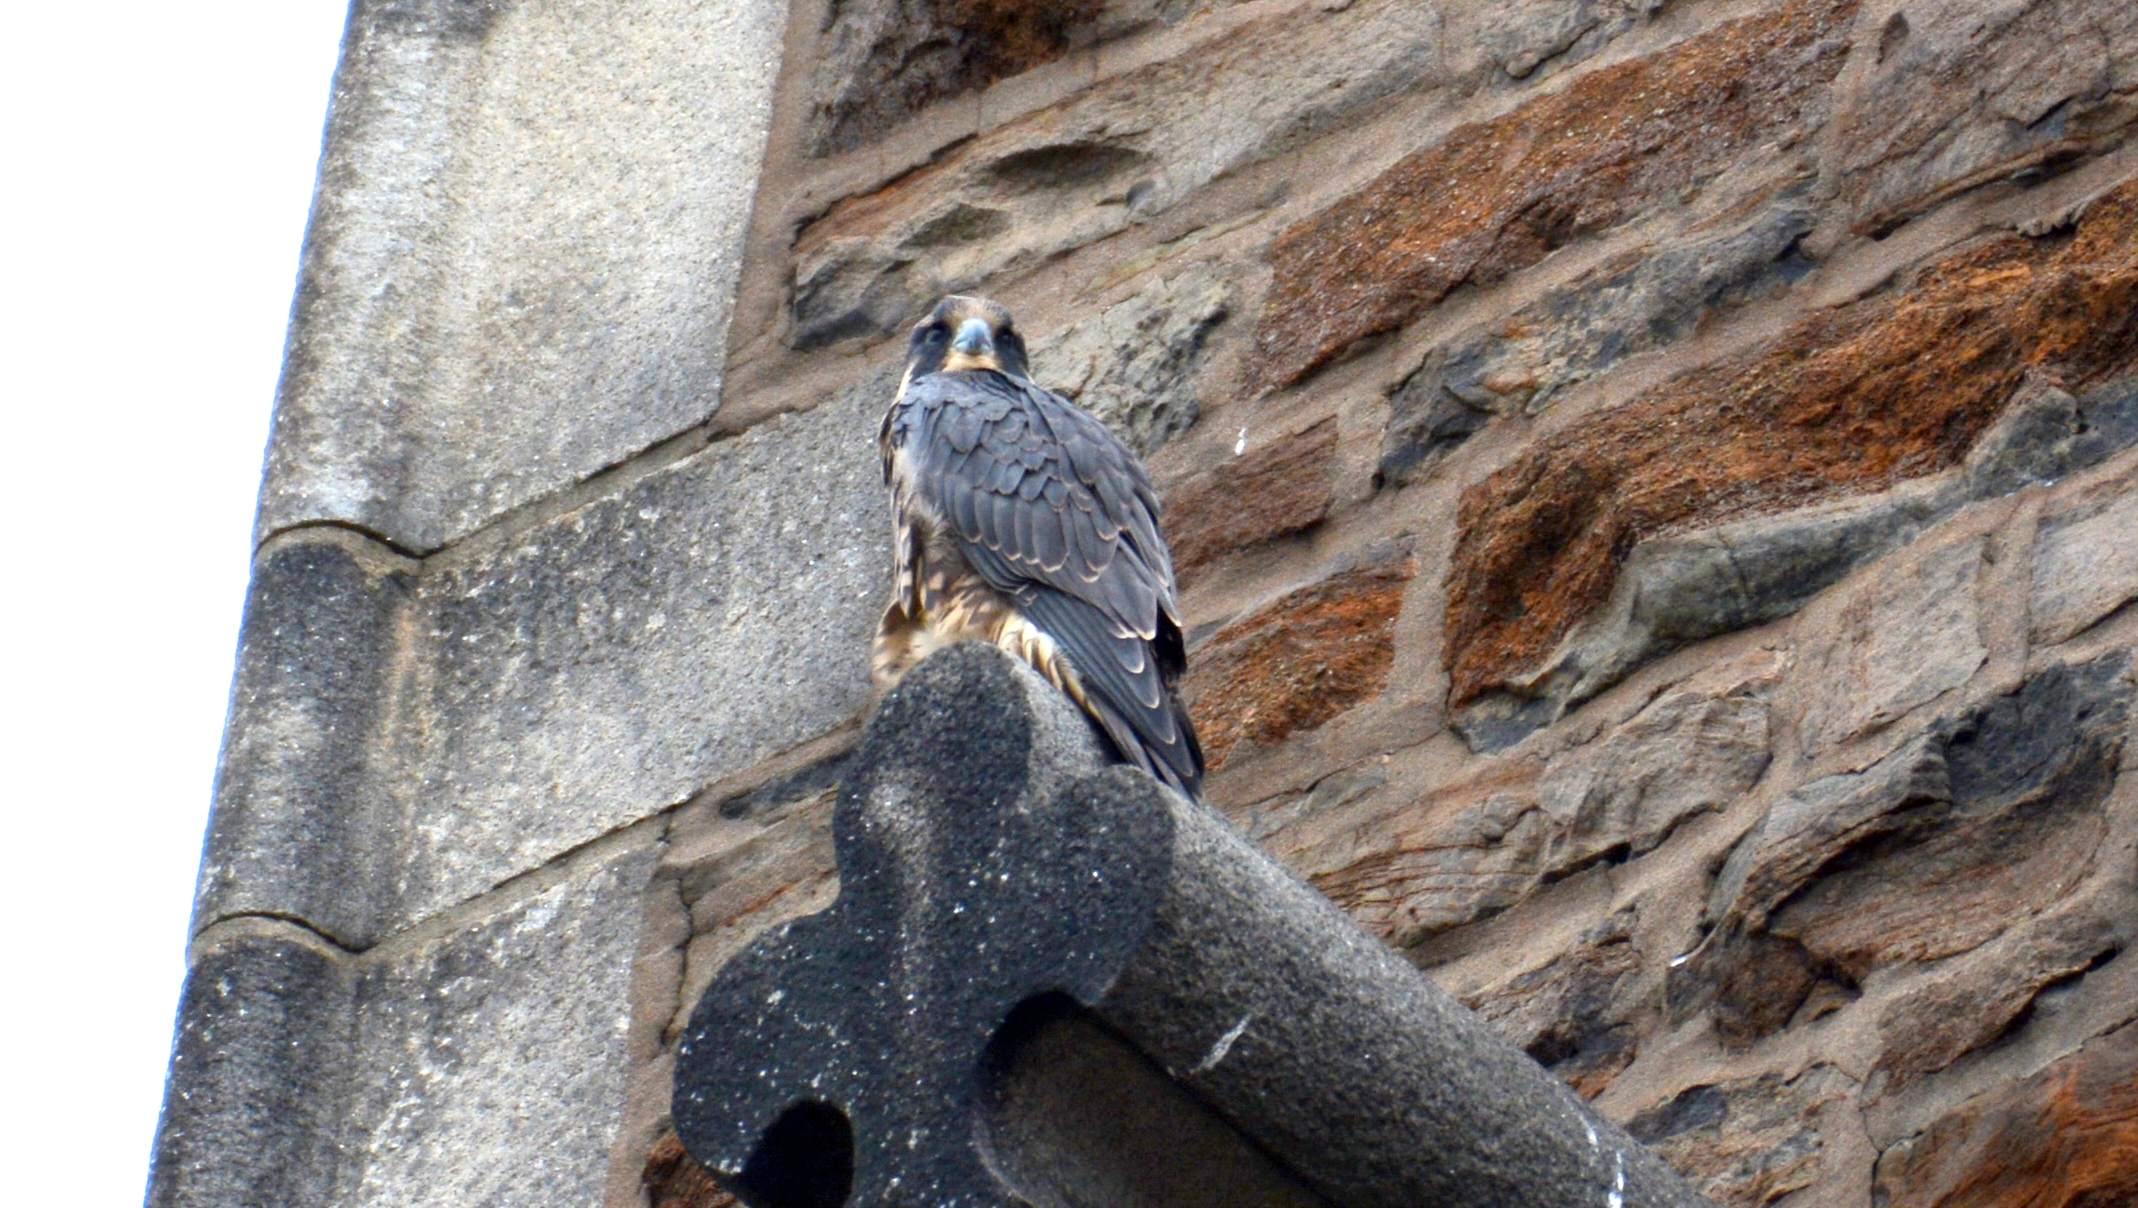 Perched on the lower steeple ledge